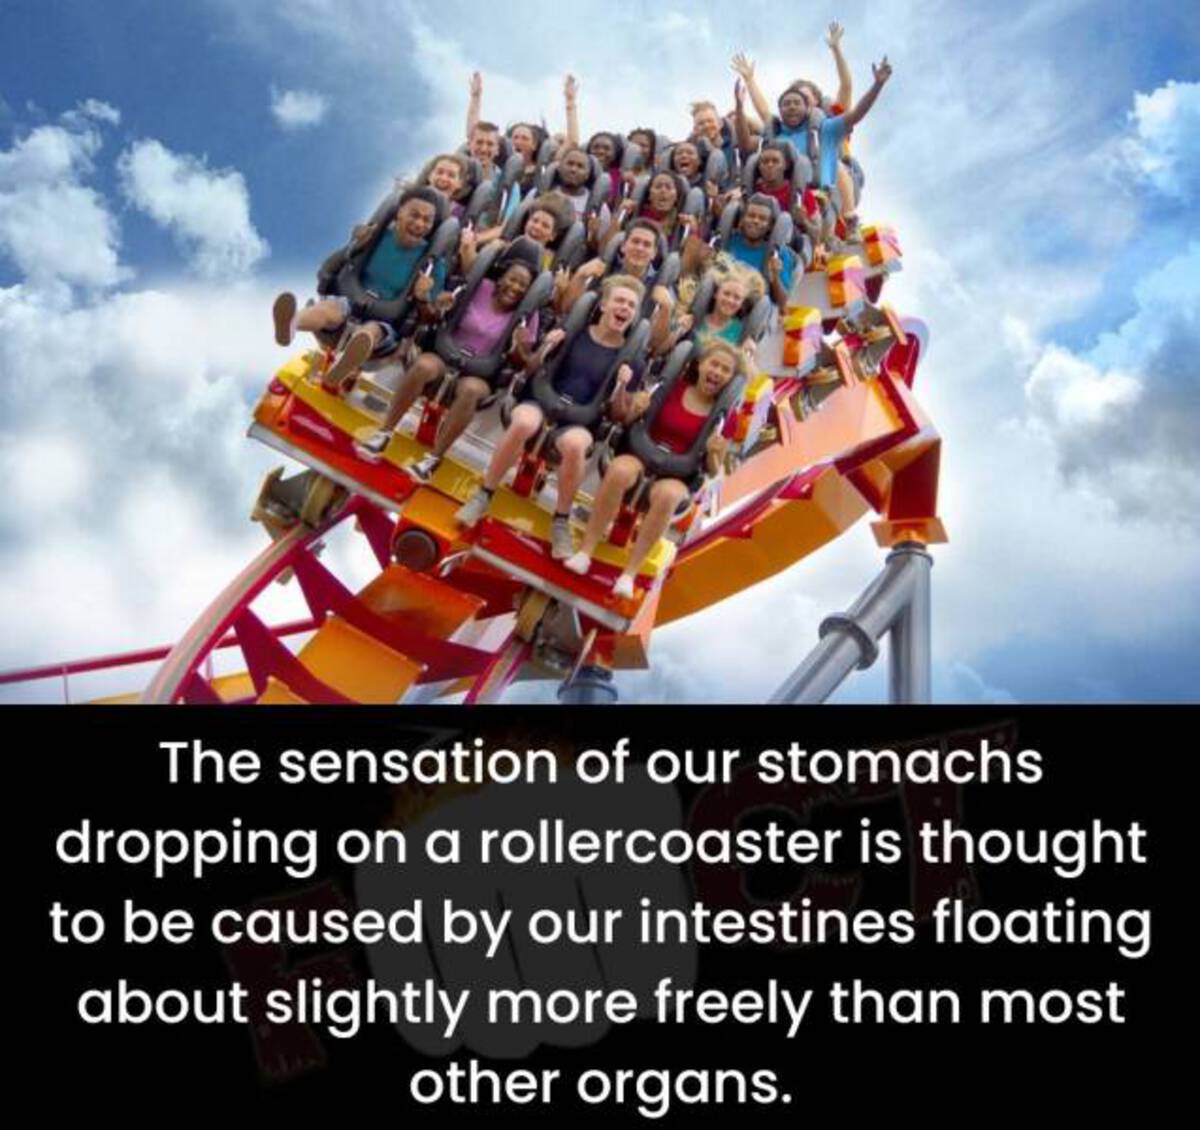 firebird roller coaster - The sensation of our stomachs dropping on a rollercoaster is thought to be caused by our intestines floating about slightly more freely than most other organs.